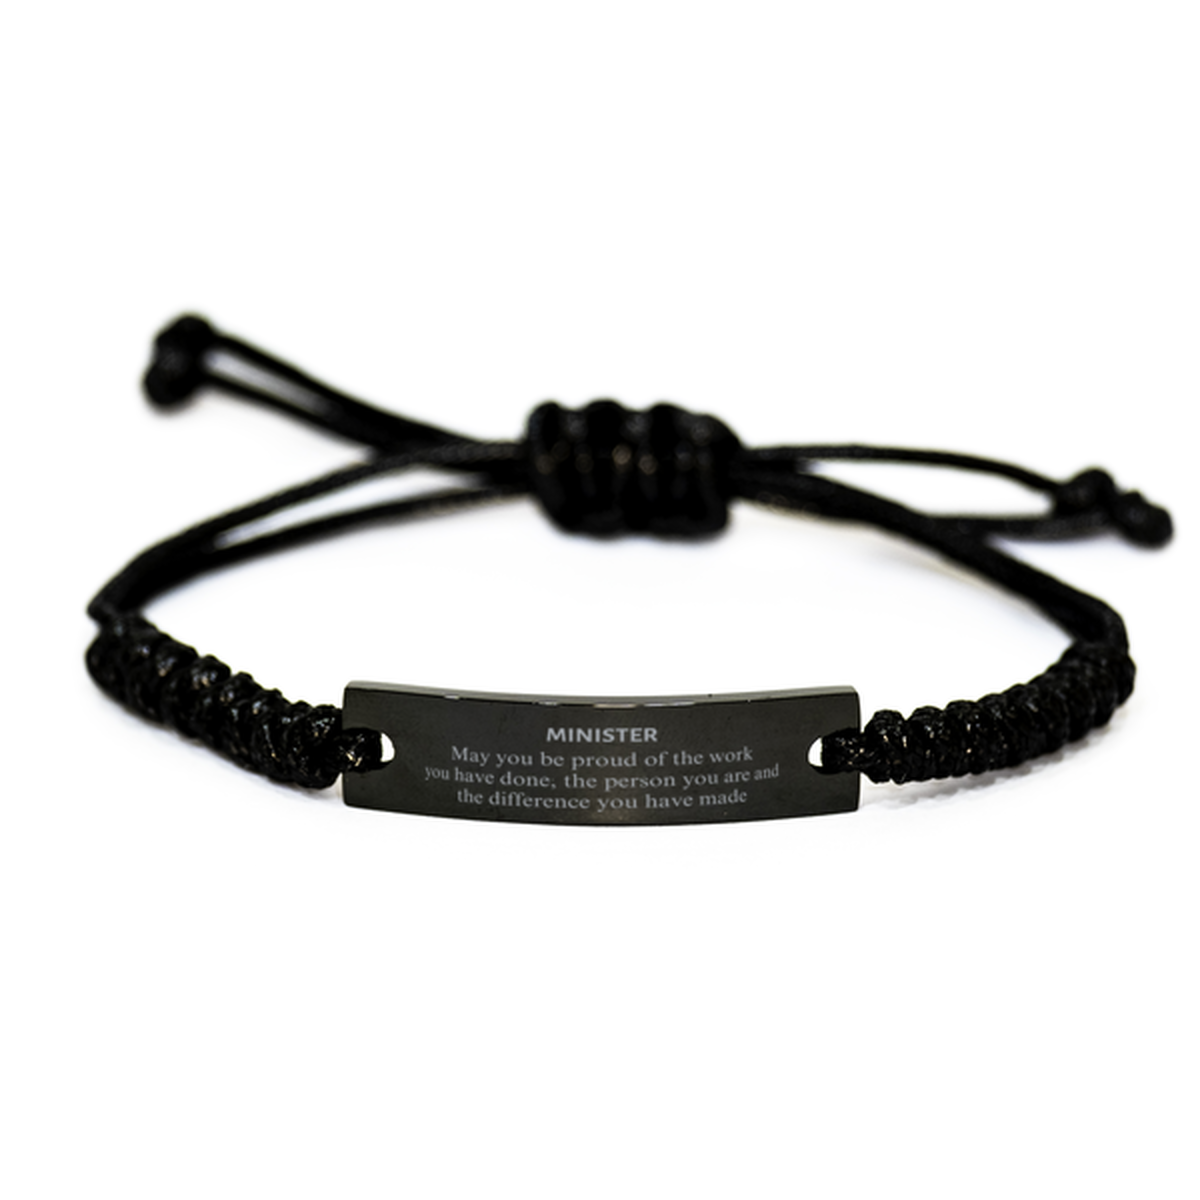 Minister May you be proud of the work you have done, Retirement Minister Black Rope Bracelet for Colleague Appreciation Gifts Amazing for Minister